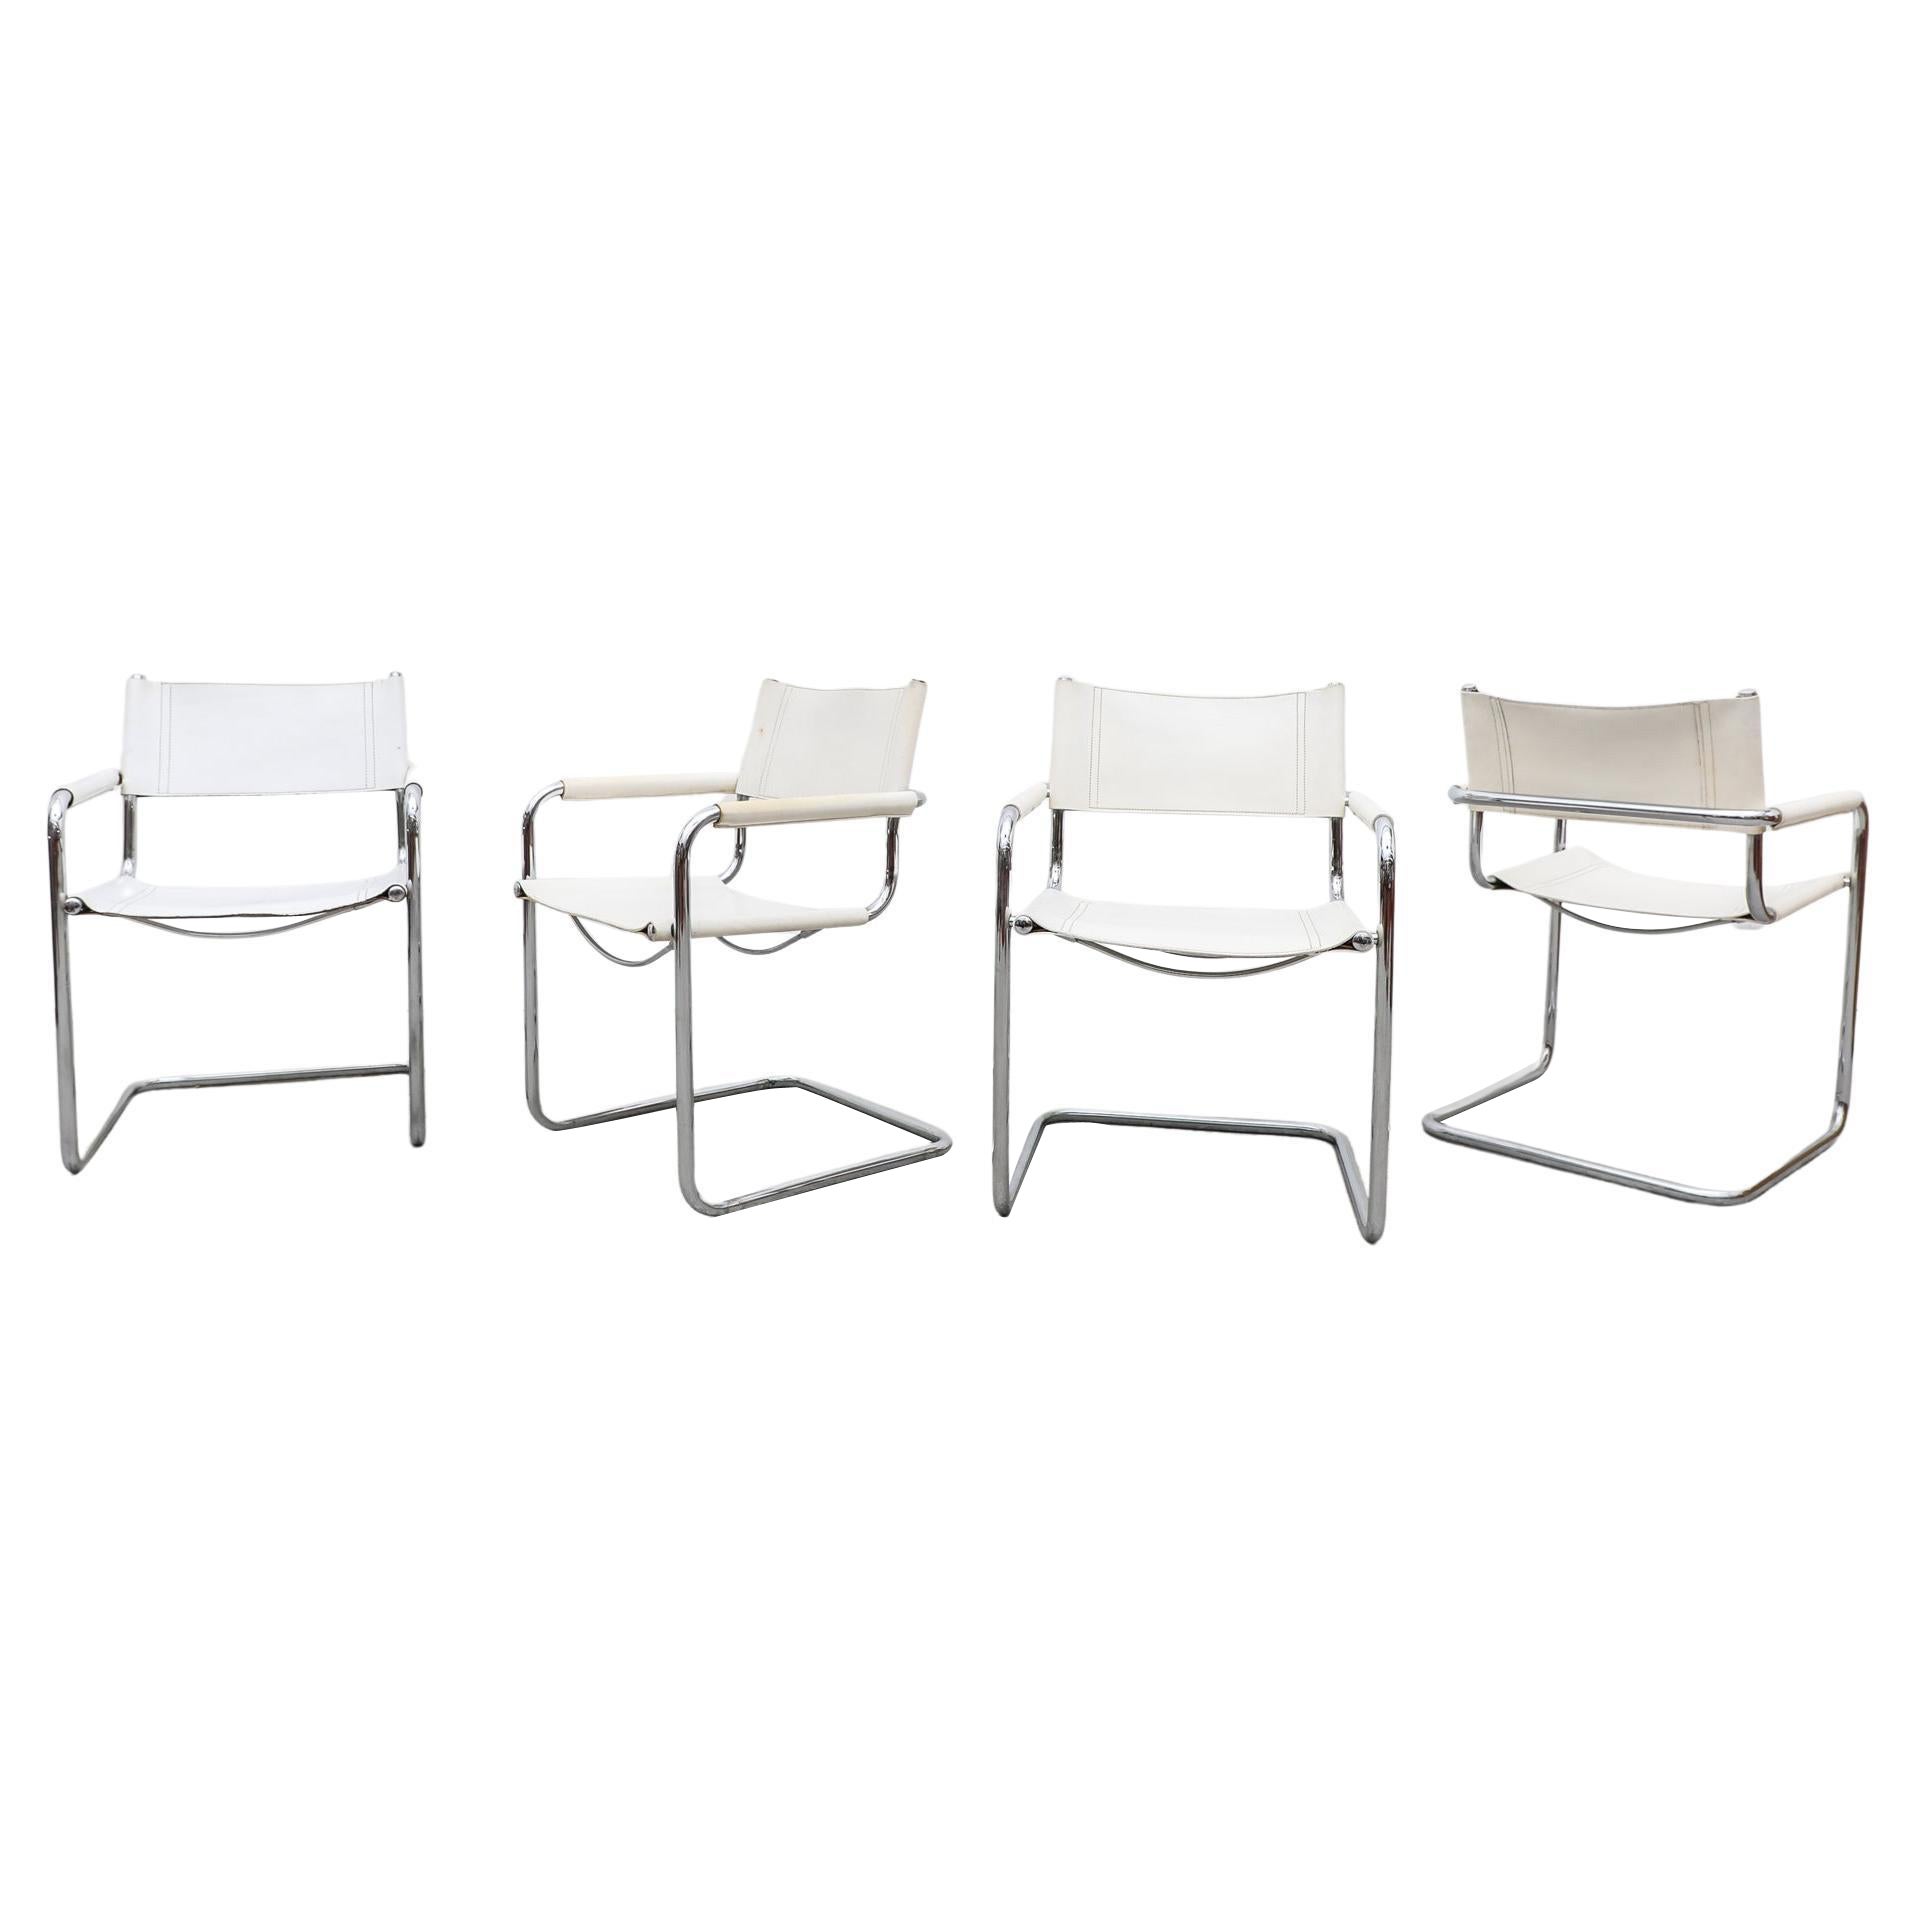 Set of 4 Marcel Breuer Style White Leather and Chrome Framed Cantilever Chairs